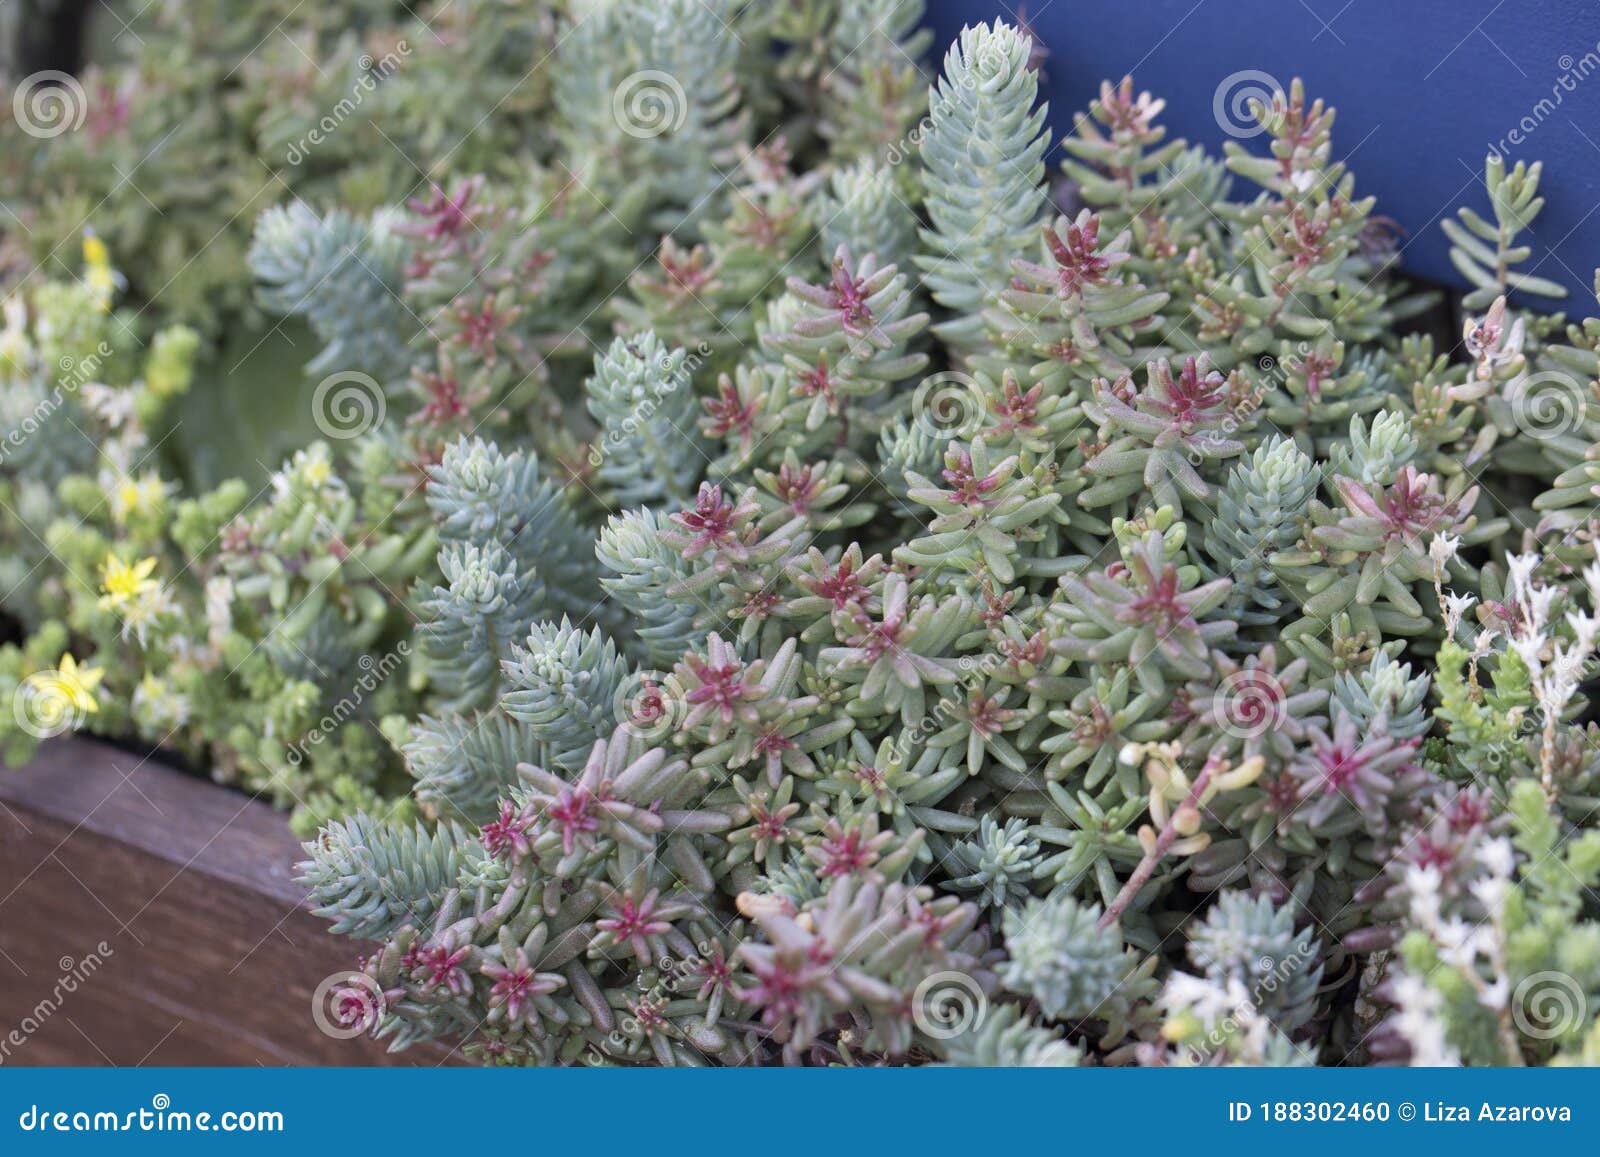 Natural Filled Frame Close Up Shot Of A Bunch Of Pastel Blue Green Red Sedum Reflexeum Or Rupestre Jenny S Stonecrop Blue Stock Photo Image Of Orpine Bunch 188302460